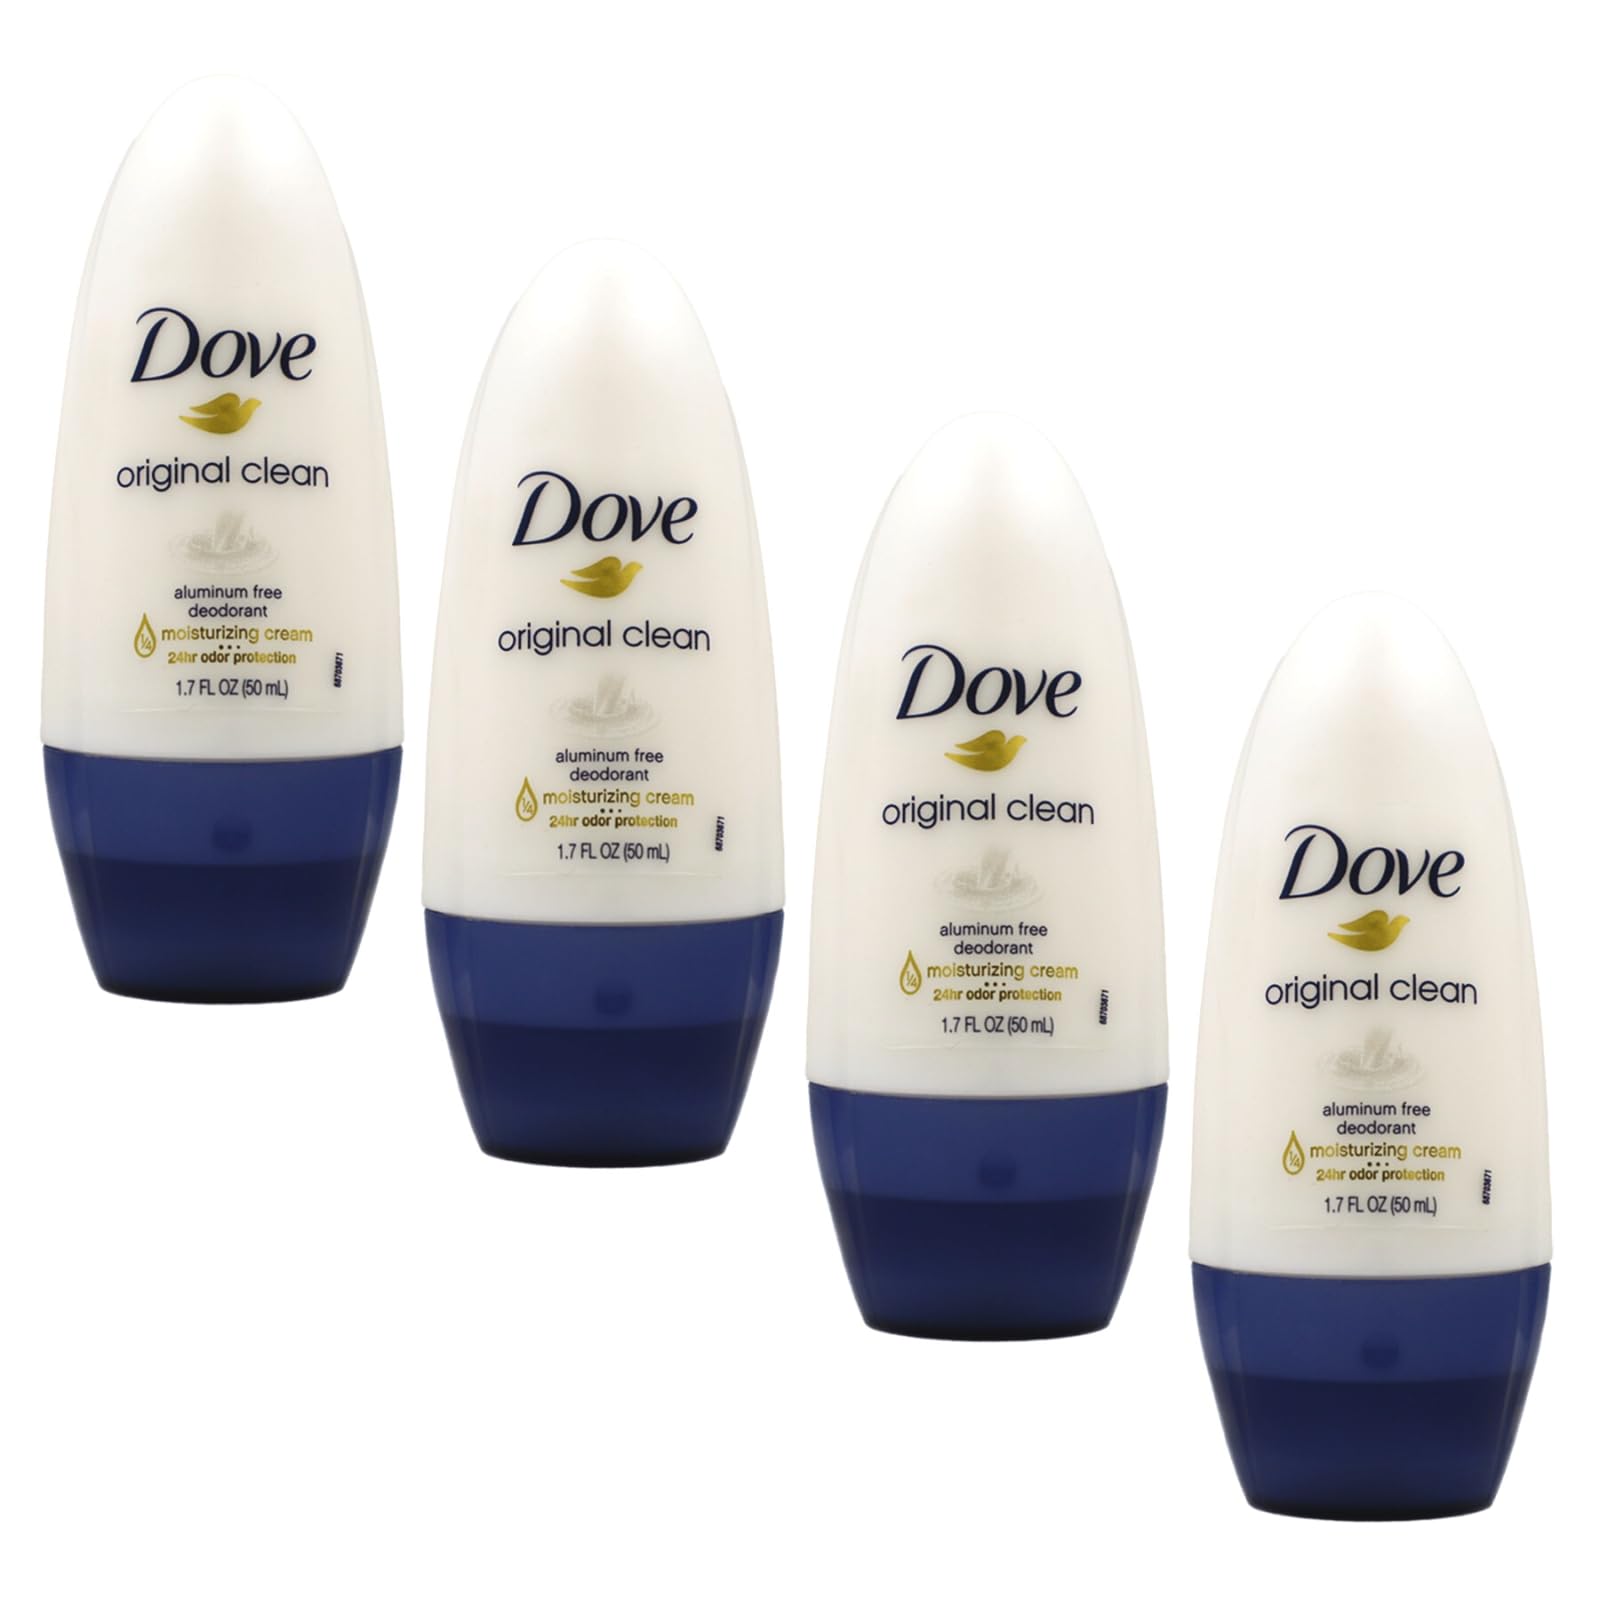 4-Count 1.7-Oz Dove Original Clean Roll On Aluminum Free Deodorant $3.26 ($0.82 each) + Free Shipping w/ Prime or on $35+